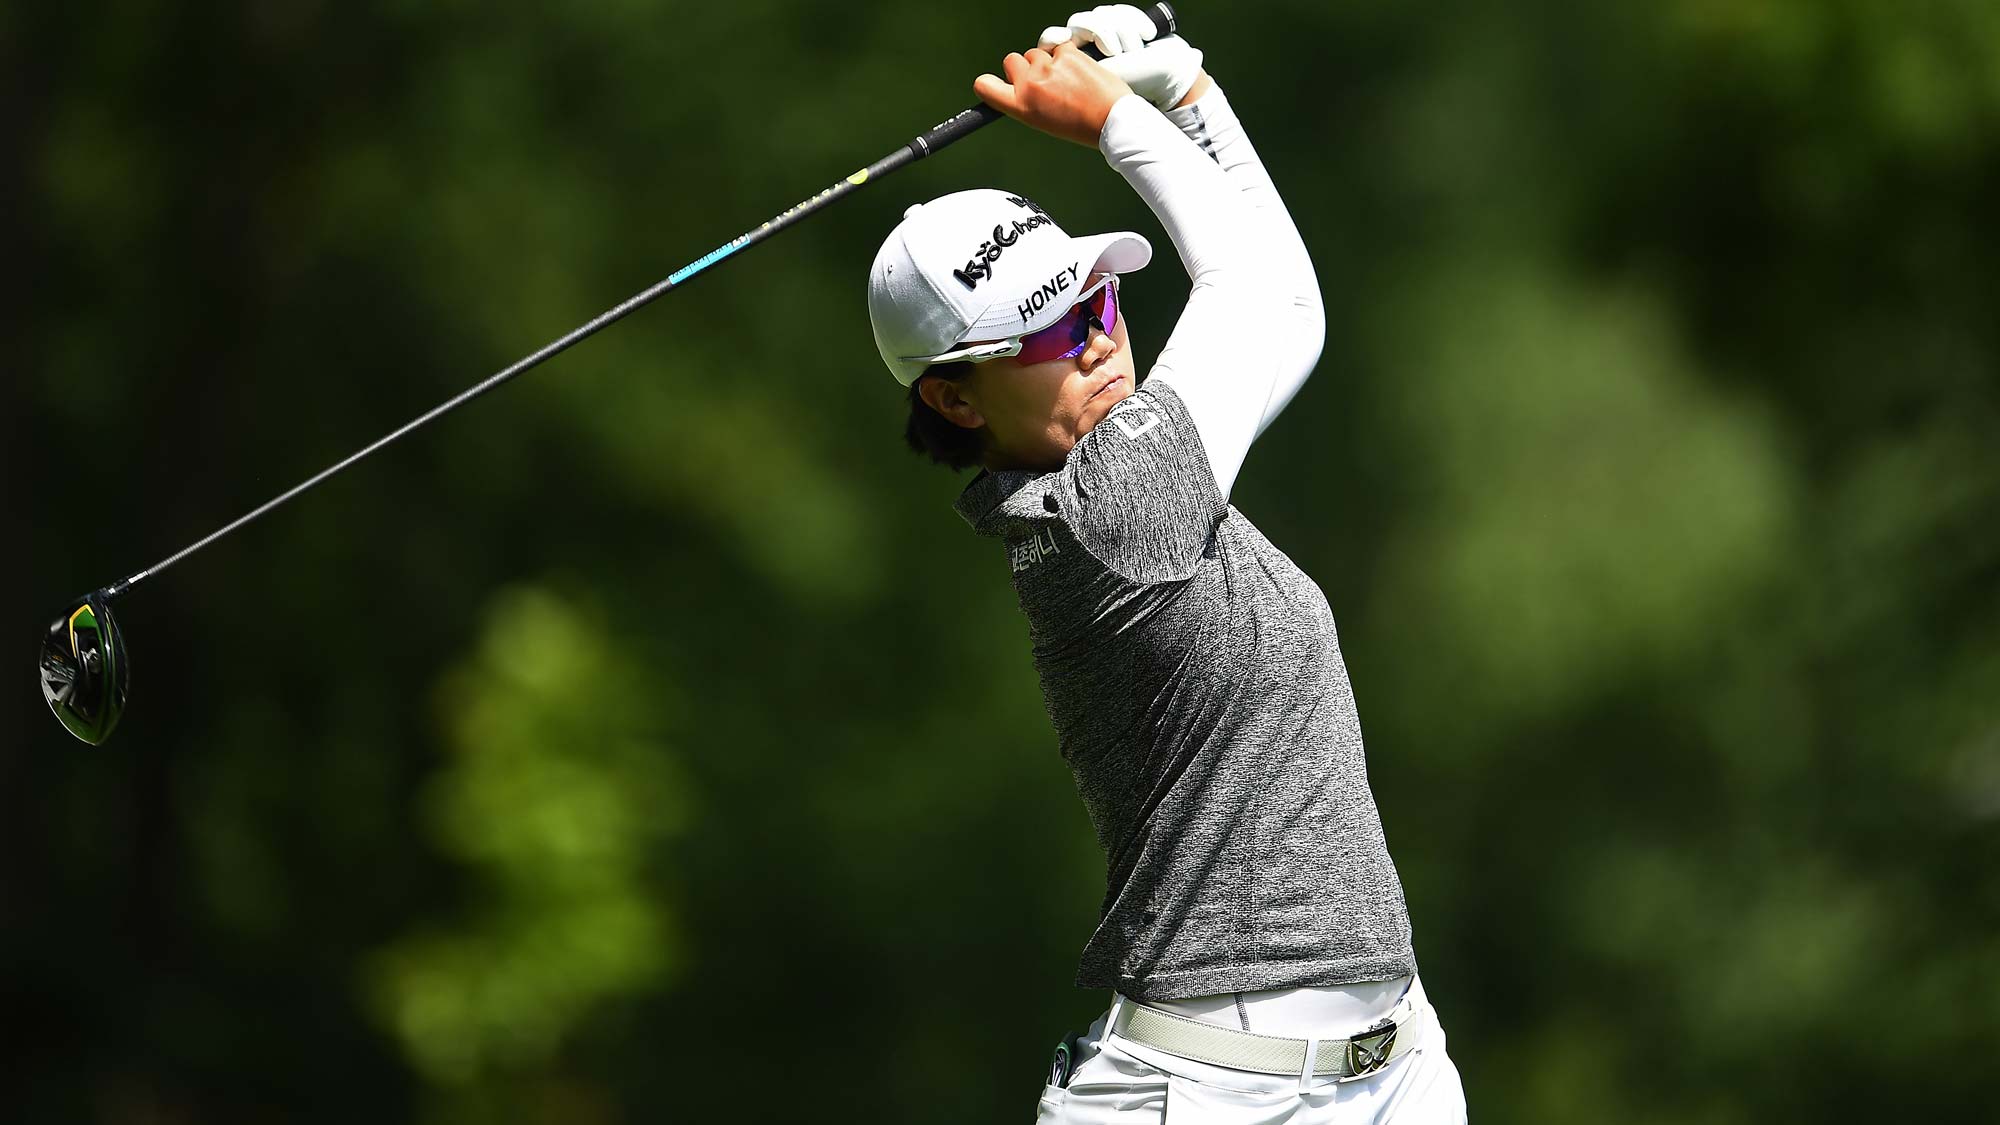 Jeong Eun Lee of Korea hits her tee shot on the third hole during the first round of the Thornberry Creek LPGA Classic